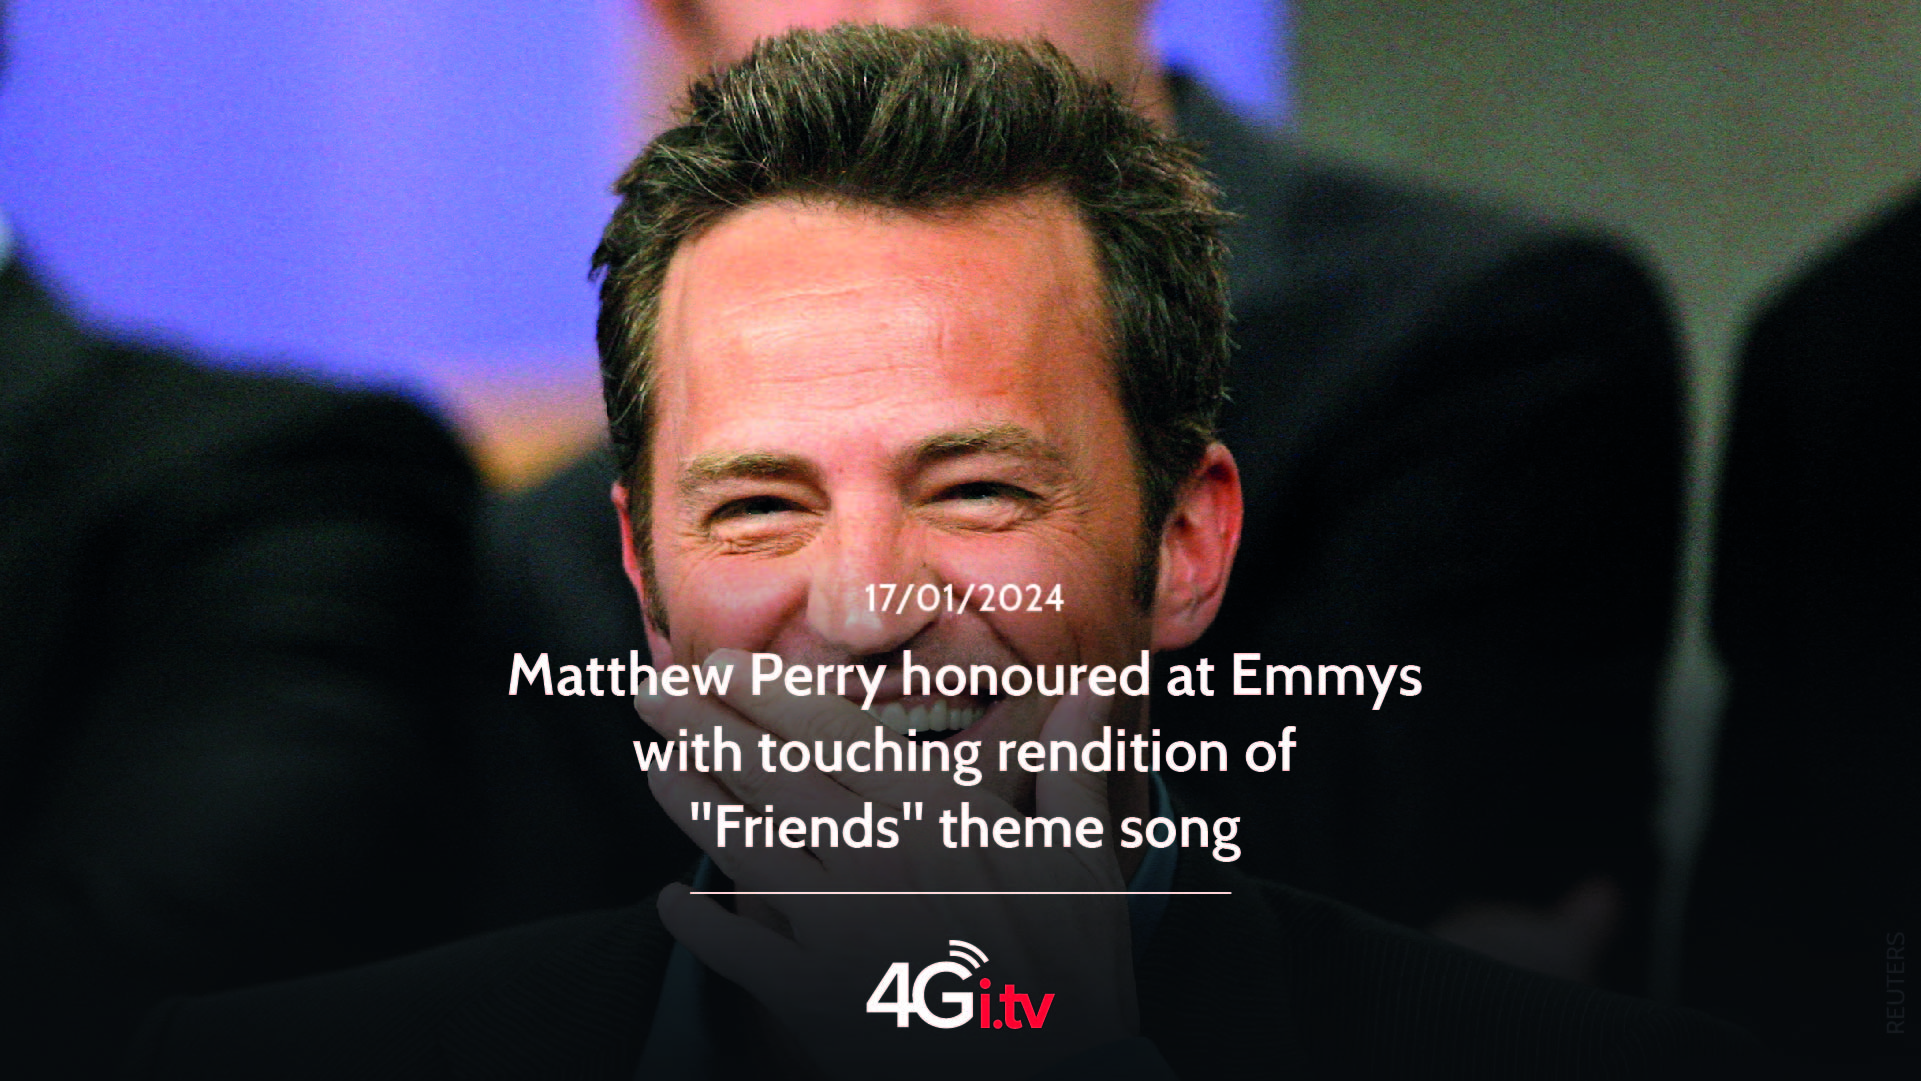 Подробнее о статье Matthew Perry honoured at Emmys with touching rendition of “Friends” theme song